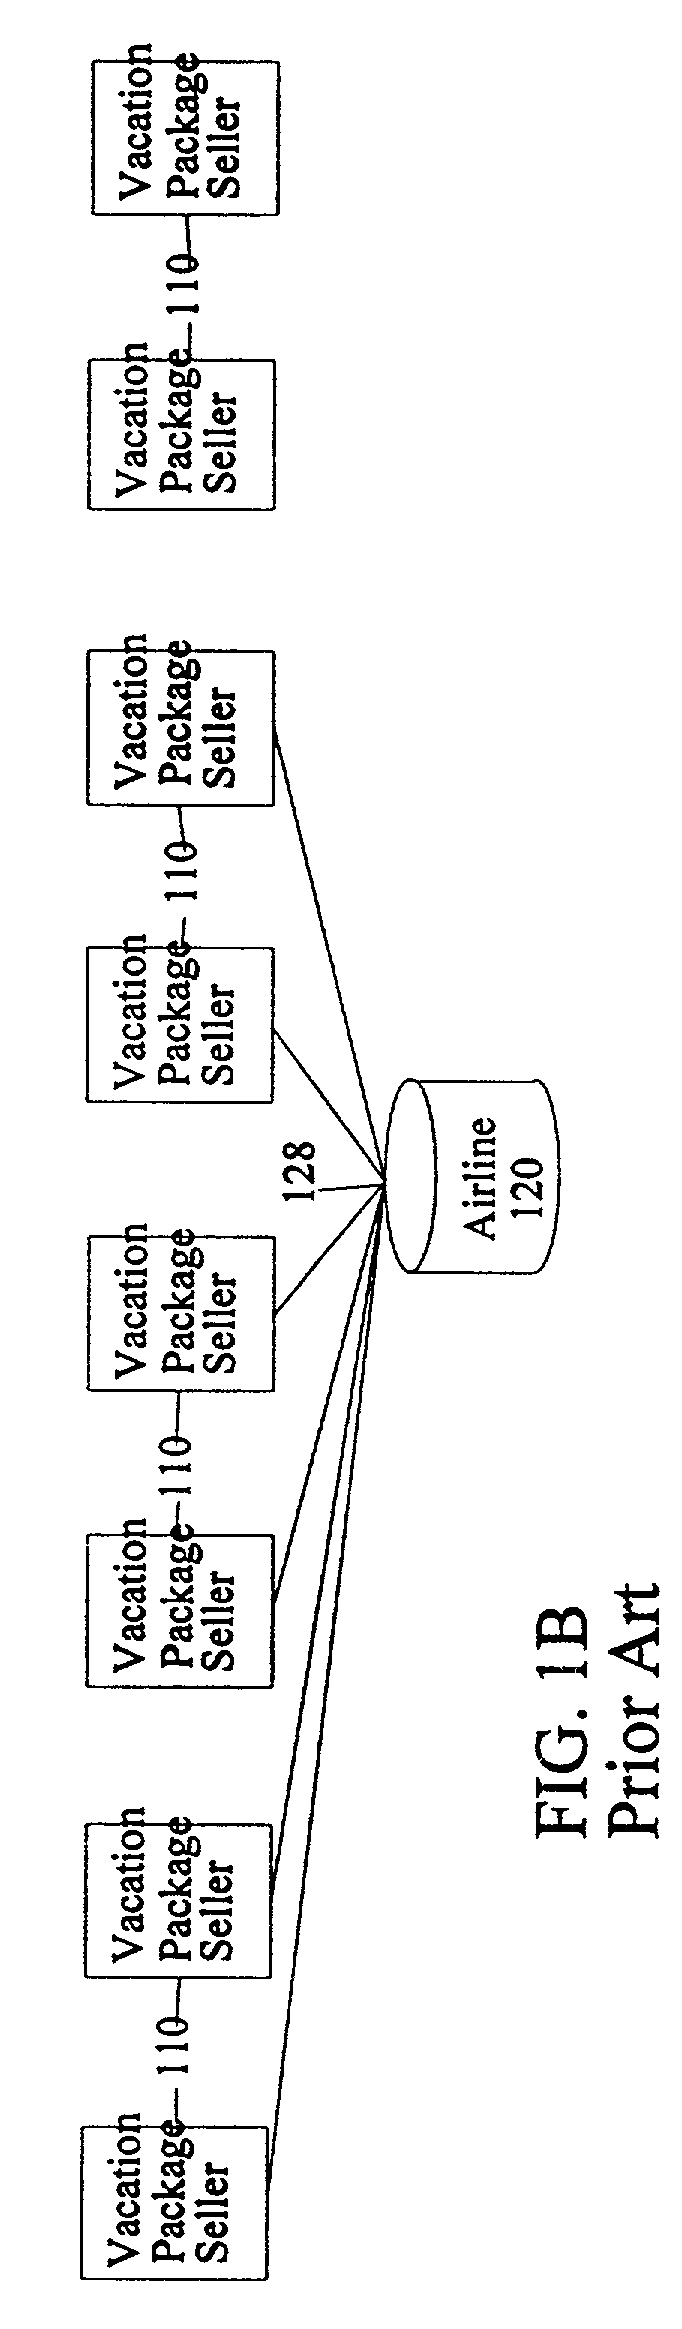 Travel product inventory and rate management system and method